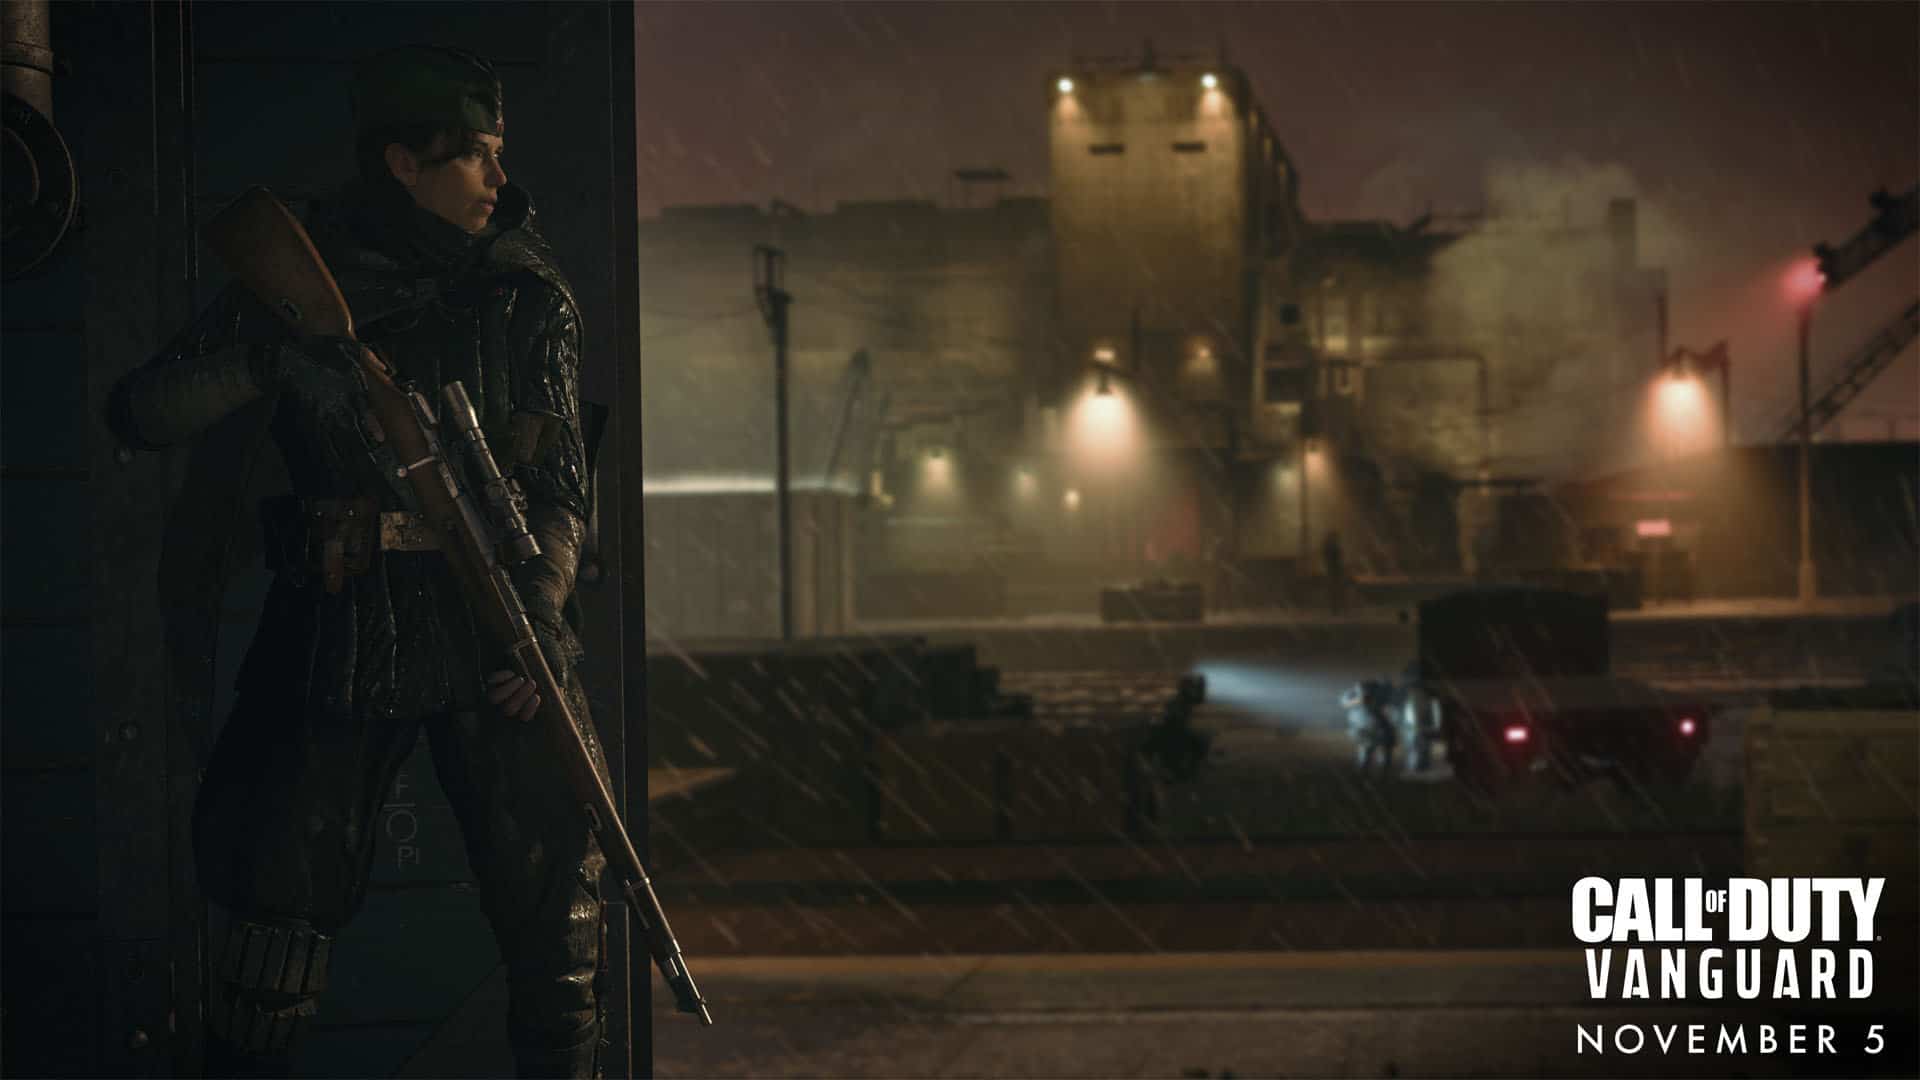 Call of Duty: Vanguard details four Operators and DualSense features